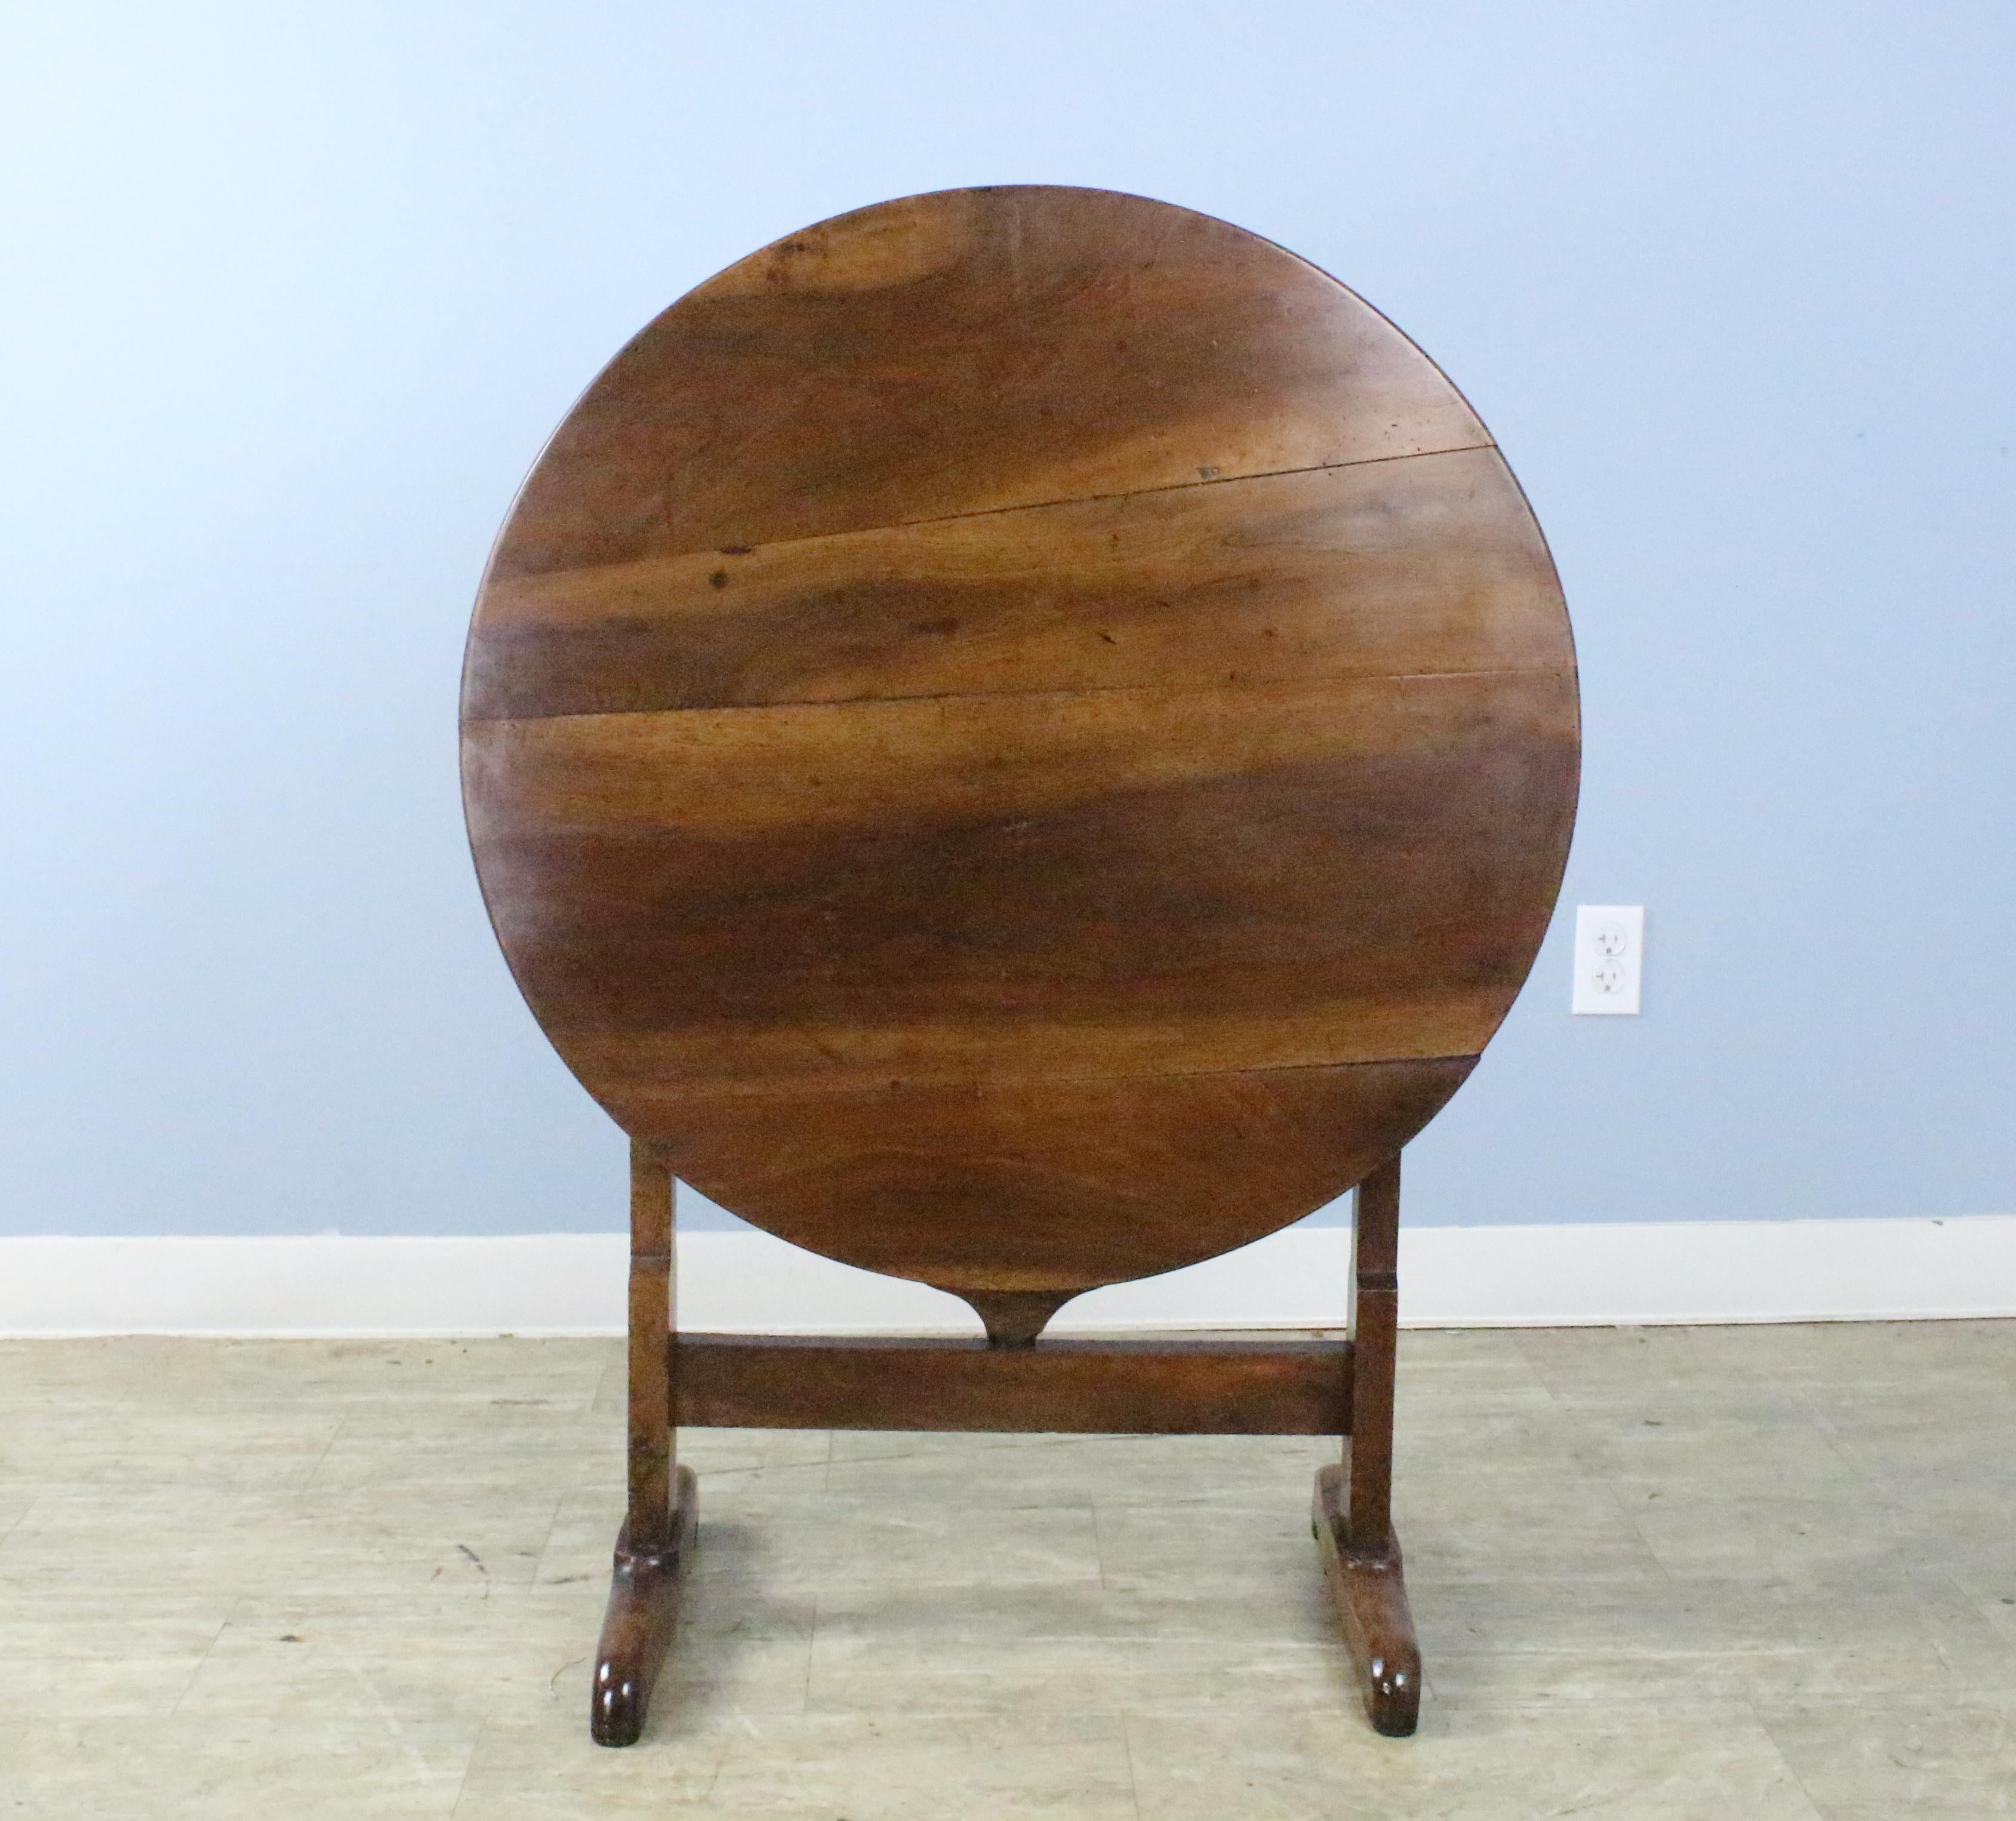 The walnut graining on this very good vendange wine tasting table is quite wonderful. The thick top has a nice patinated edge. The whimsical swivel gateleg table base is easy to use and is sturdy. The table can be stored upright if required, but